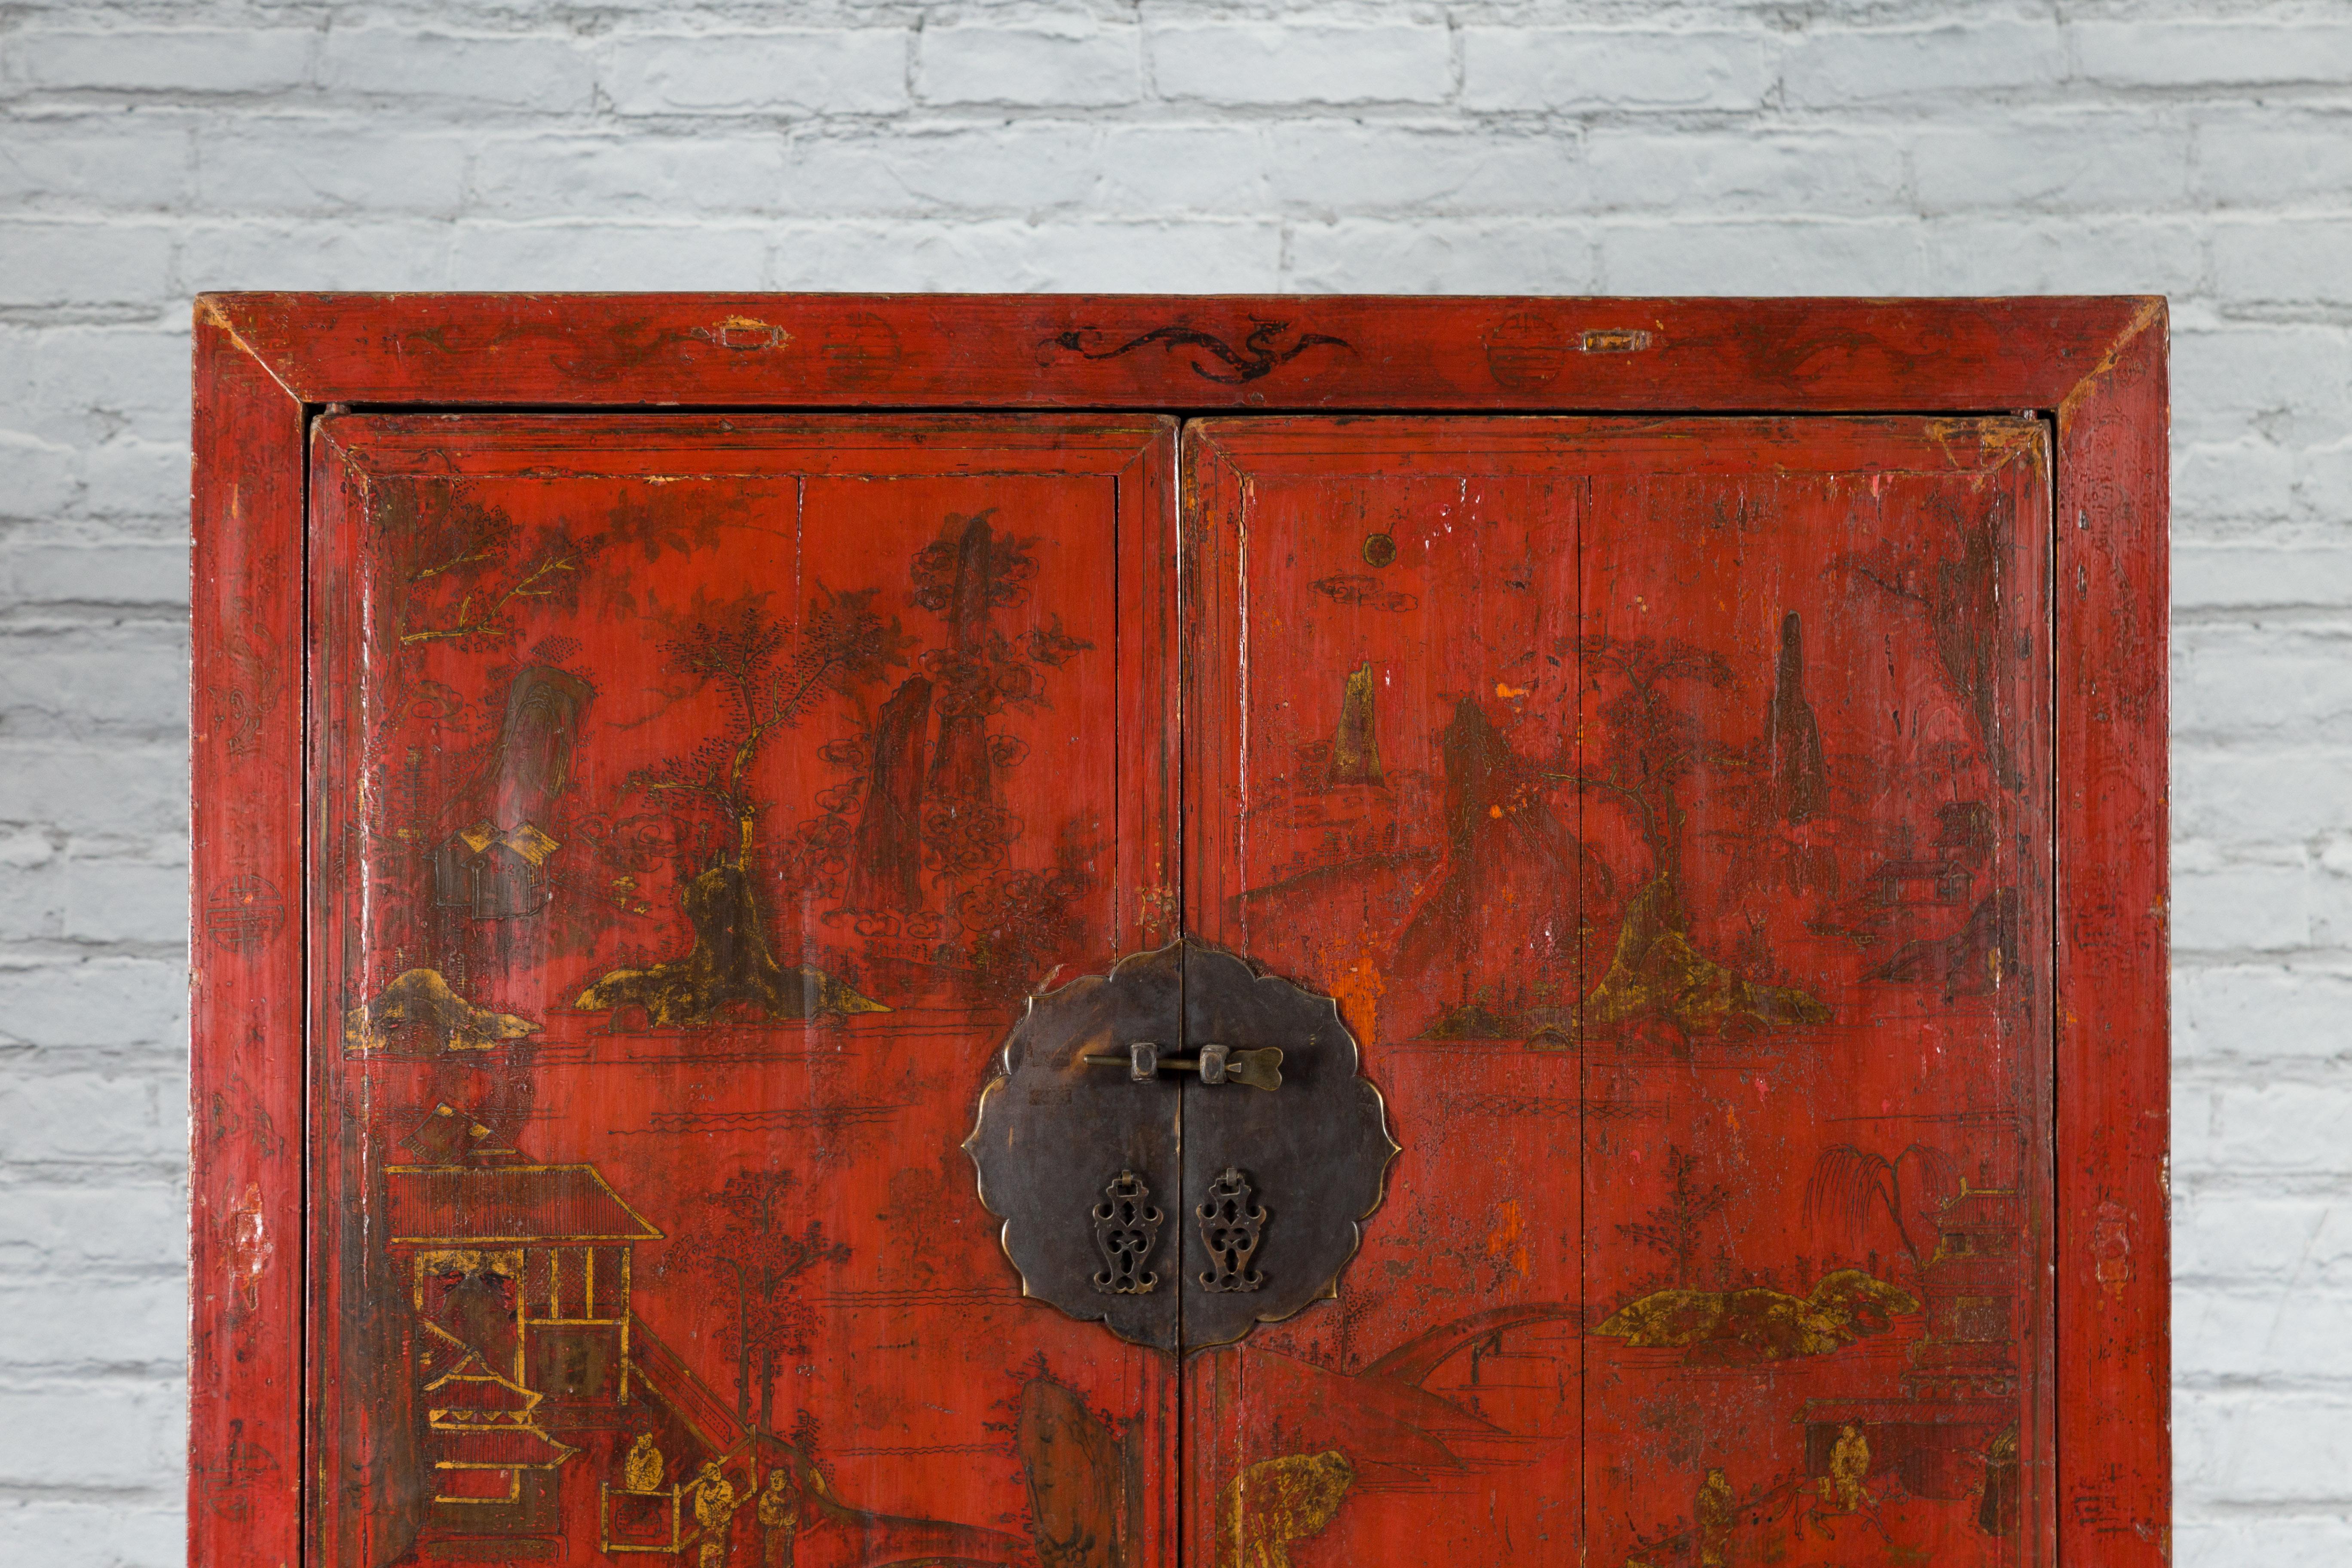 Qing Dynasty 19th Century Hand-Painted Cabinet with Original Red Lacquer In Good Condition For Sale In Yonkers, NY